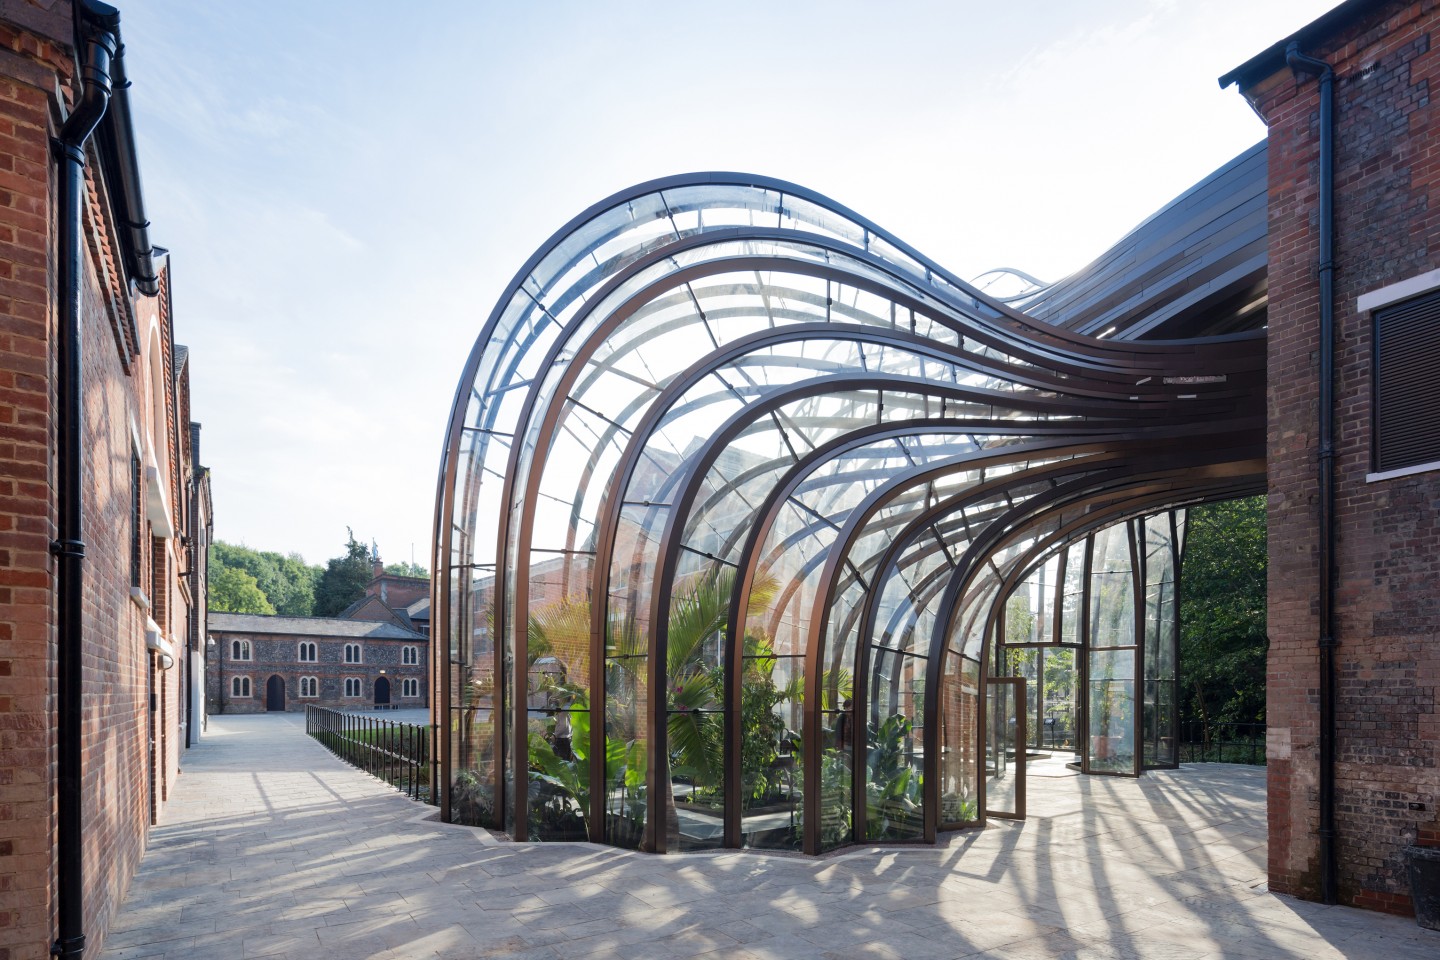 Bombay Sapphire Distillery, Whitchurch, Hampshire - View of the tropical glasshouse to the courtyard